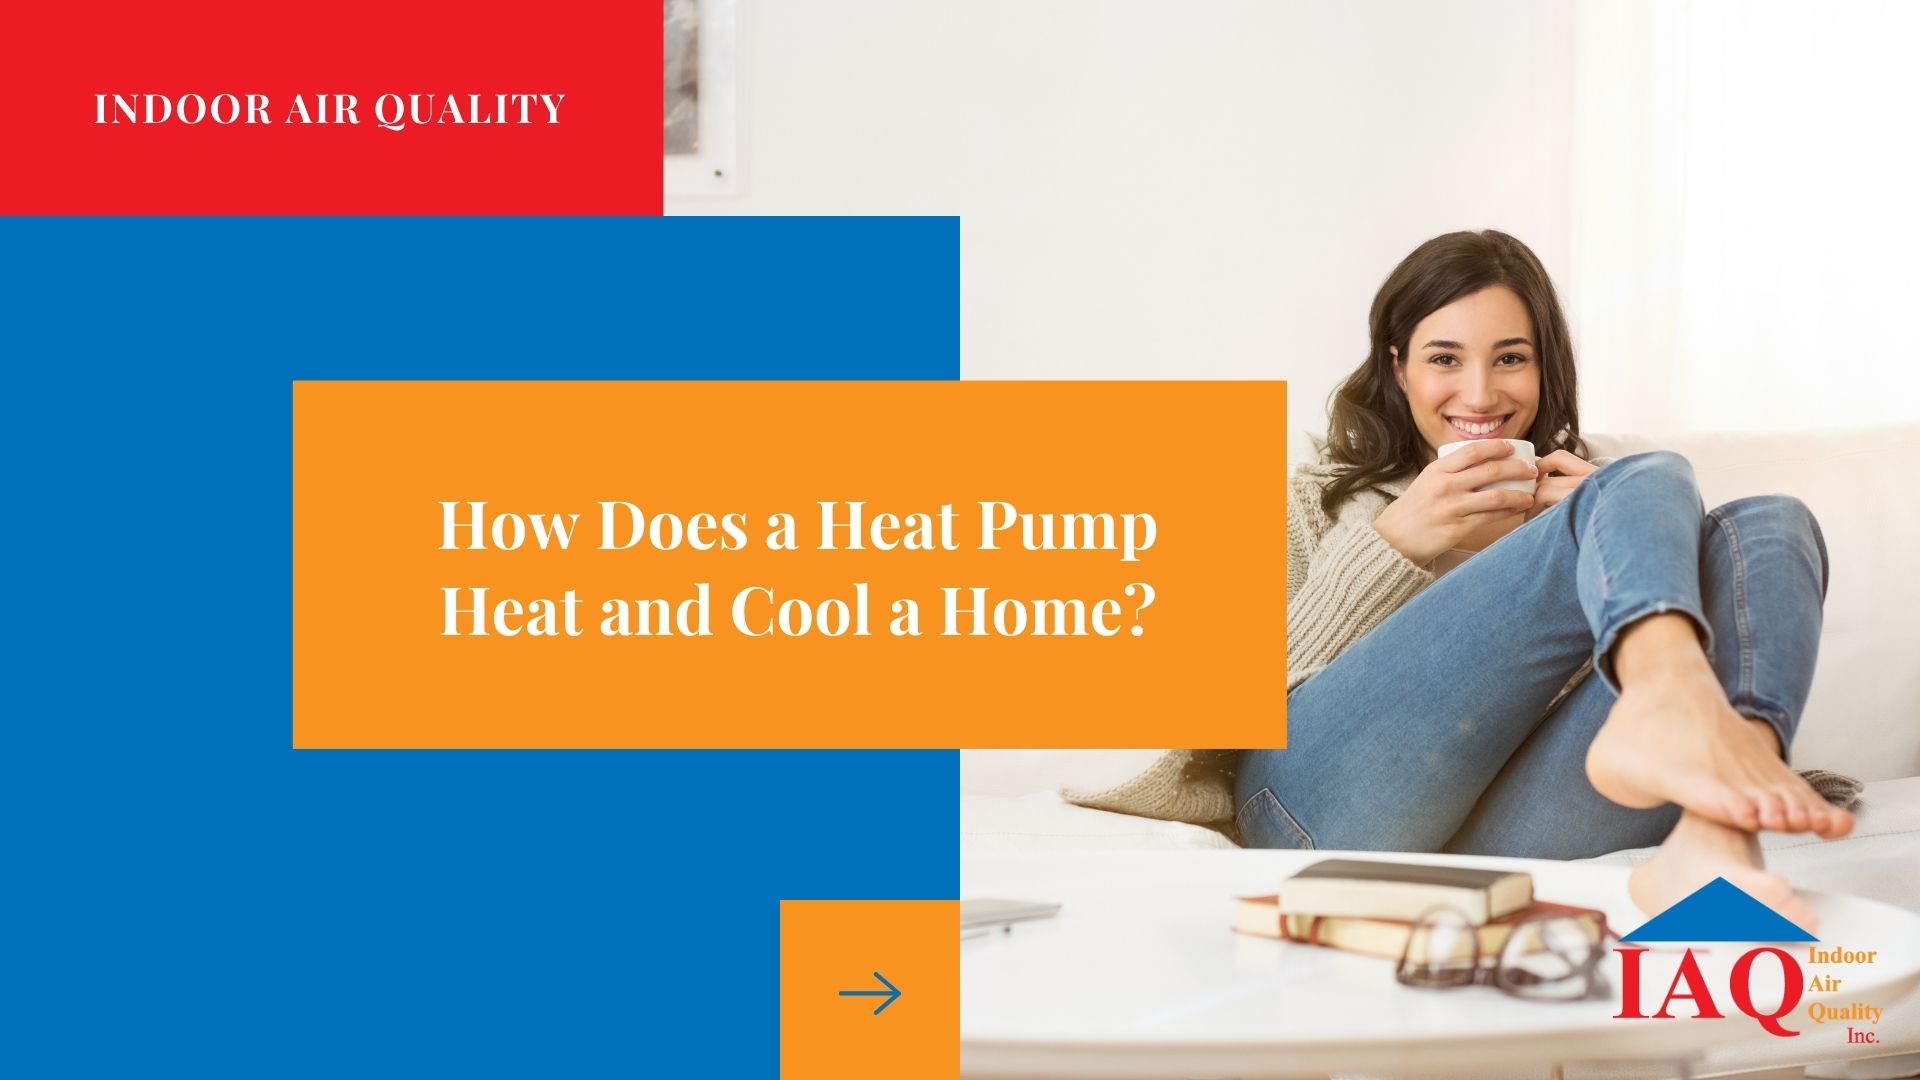 How Does a Heat Pump Heat and Cool a Home?